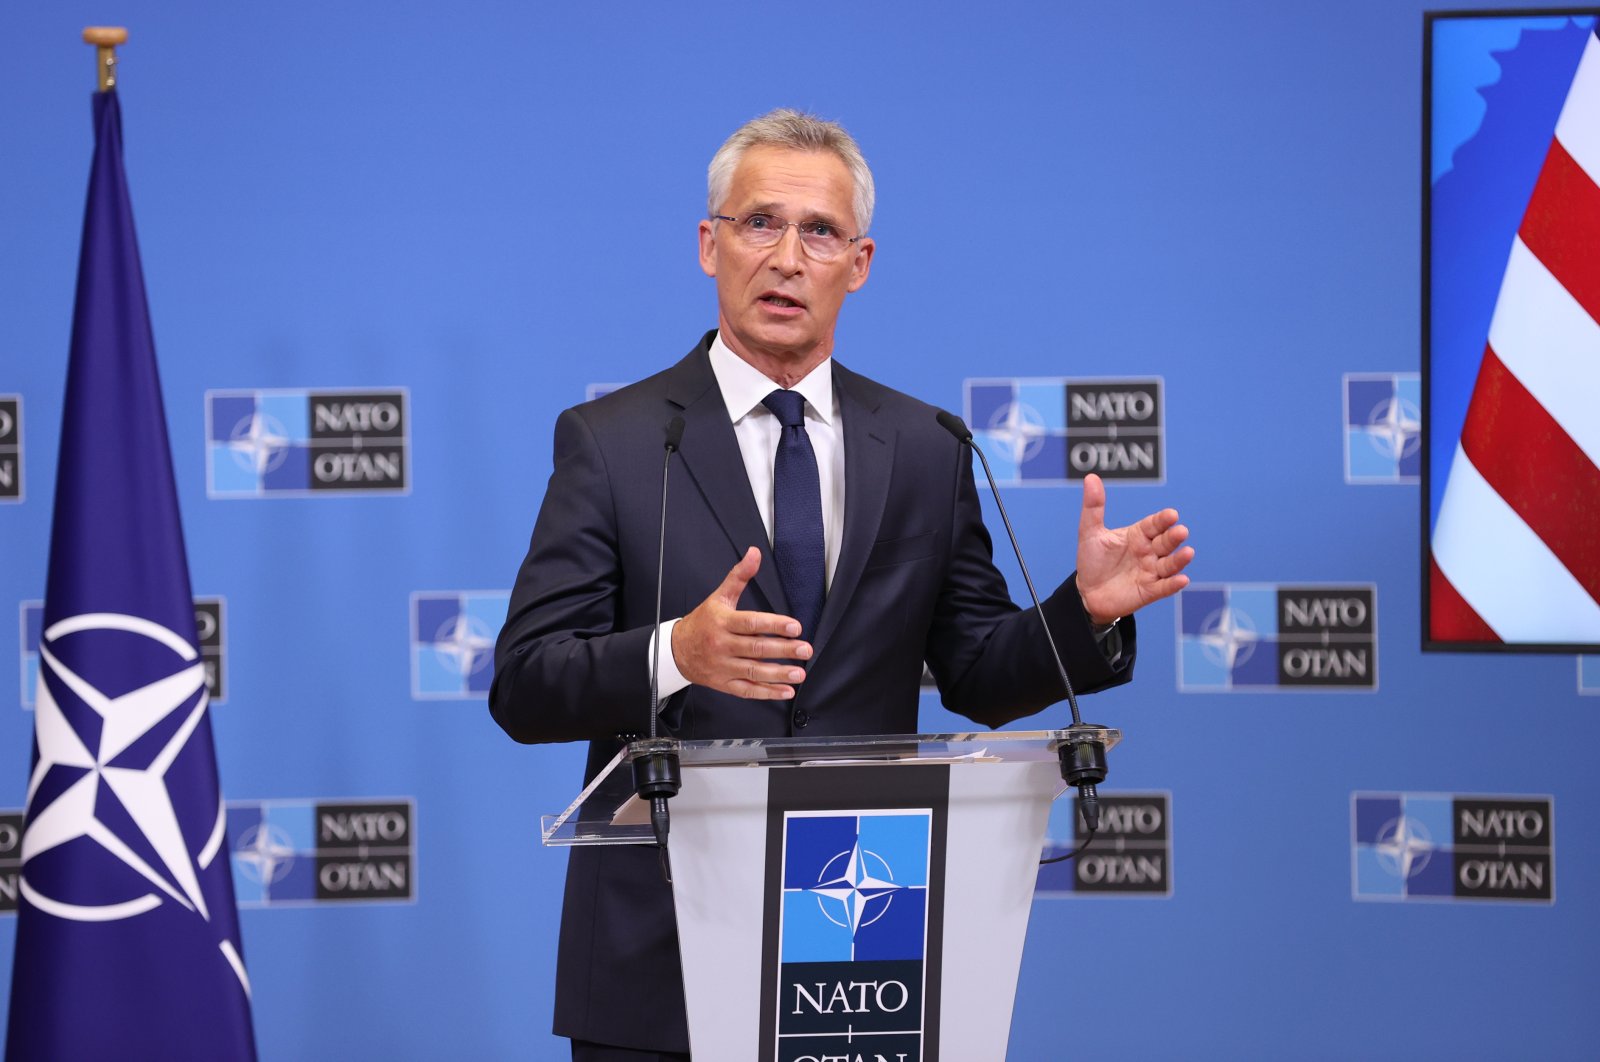 NATO support helps Ukraine advance against Russia: Stoltenberg says